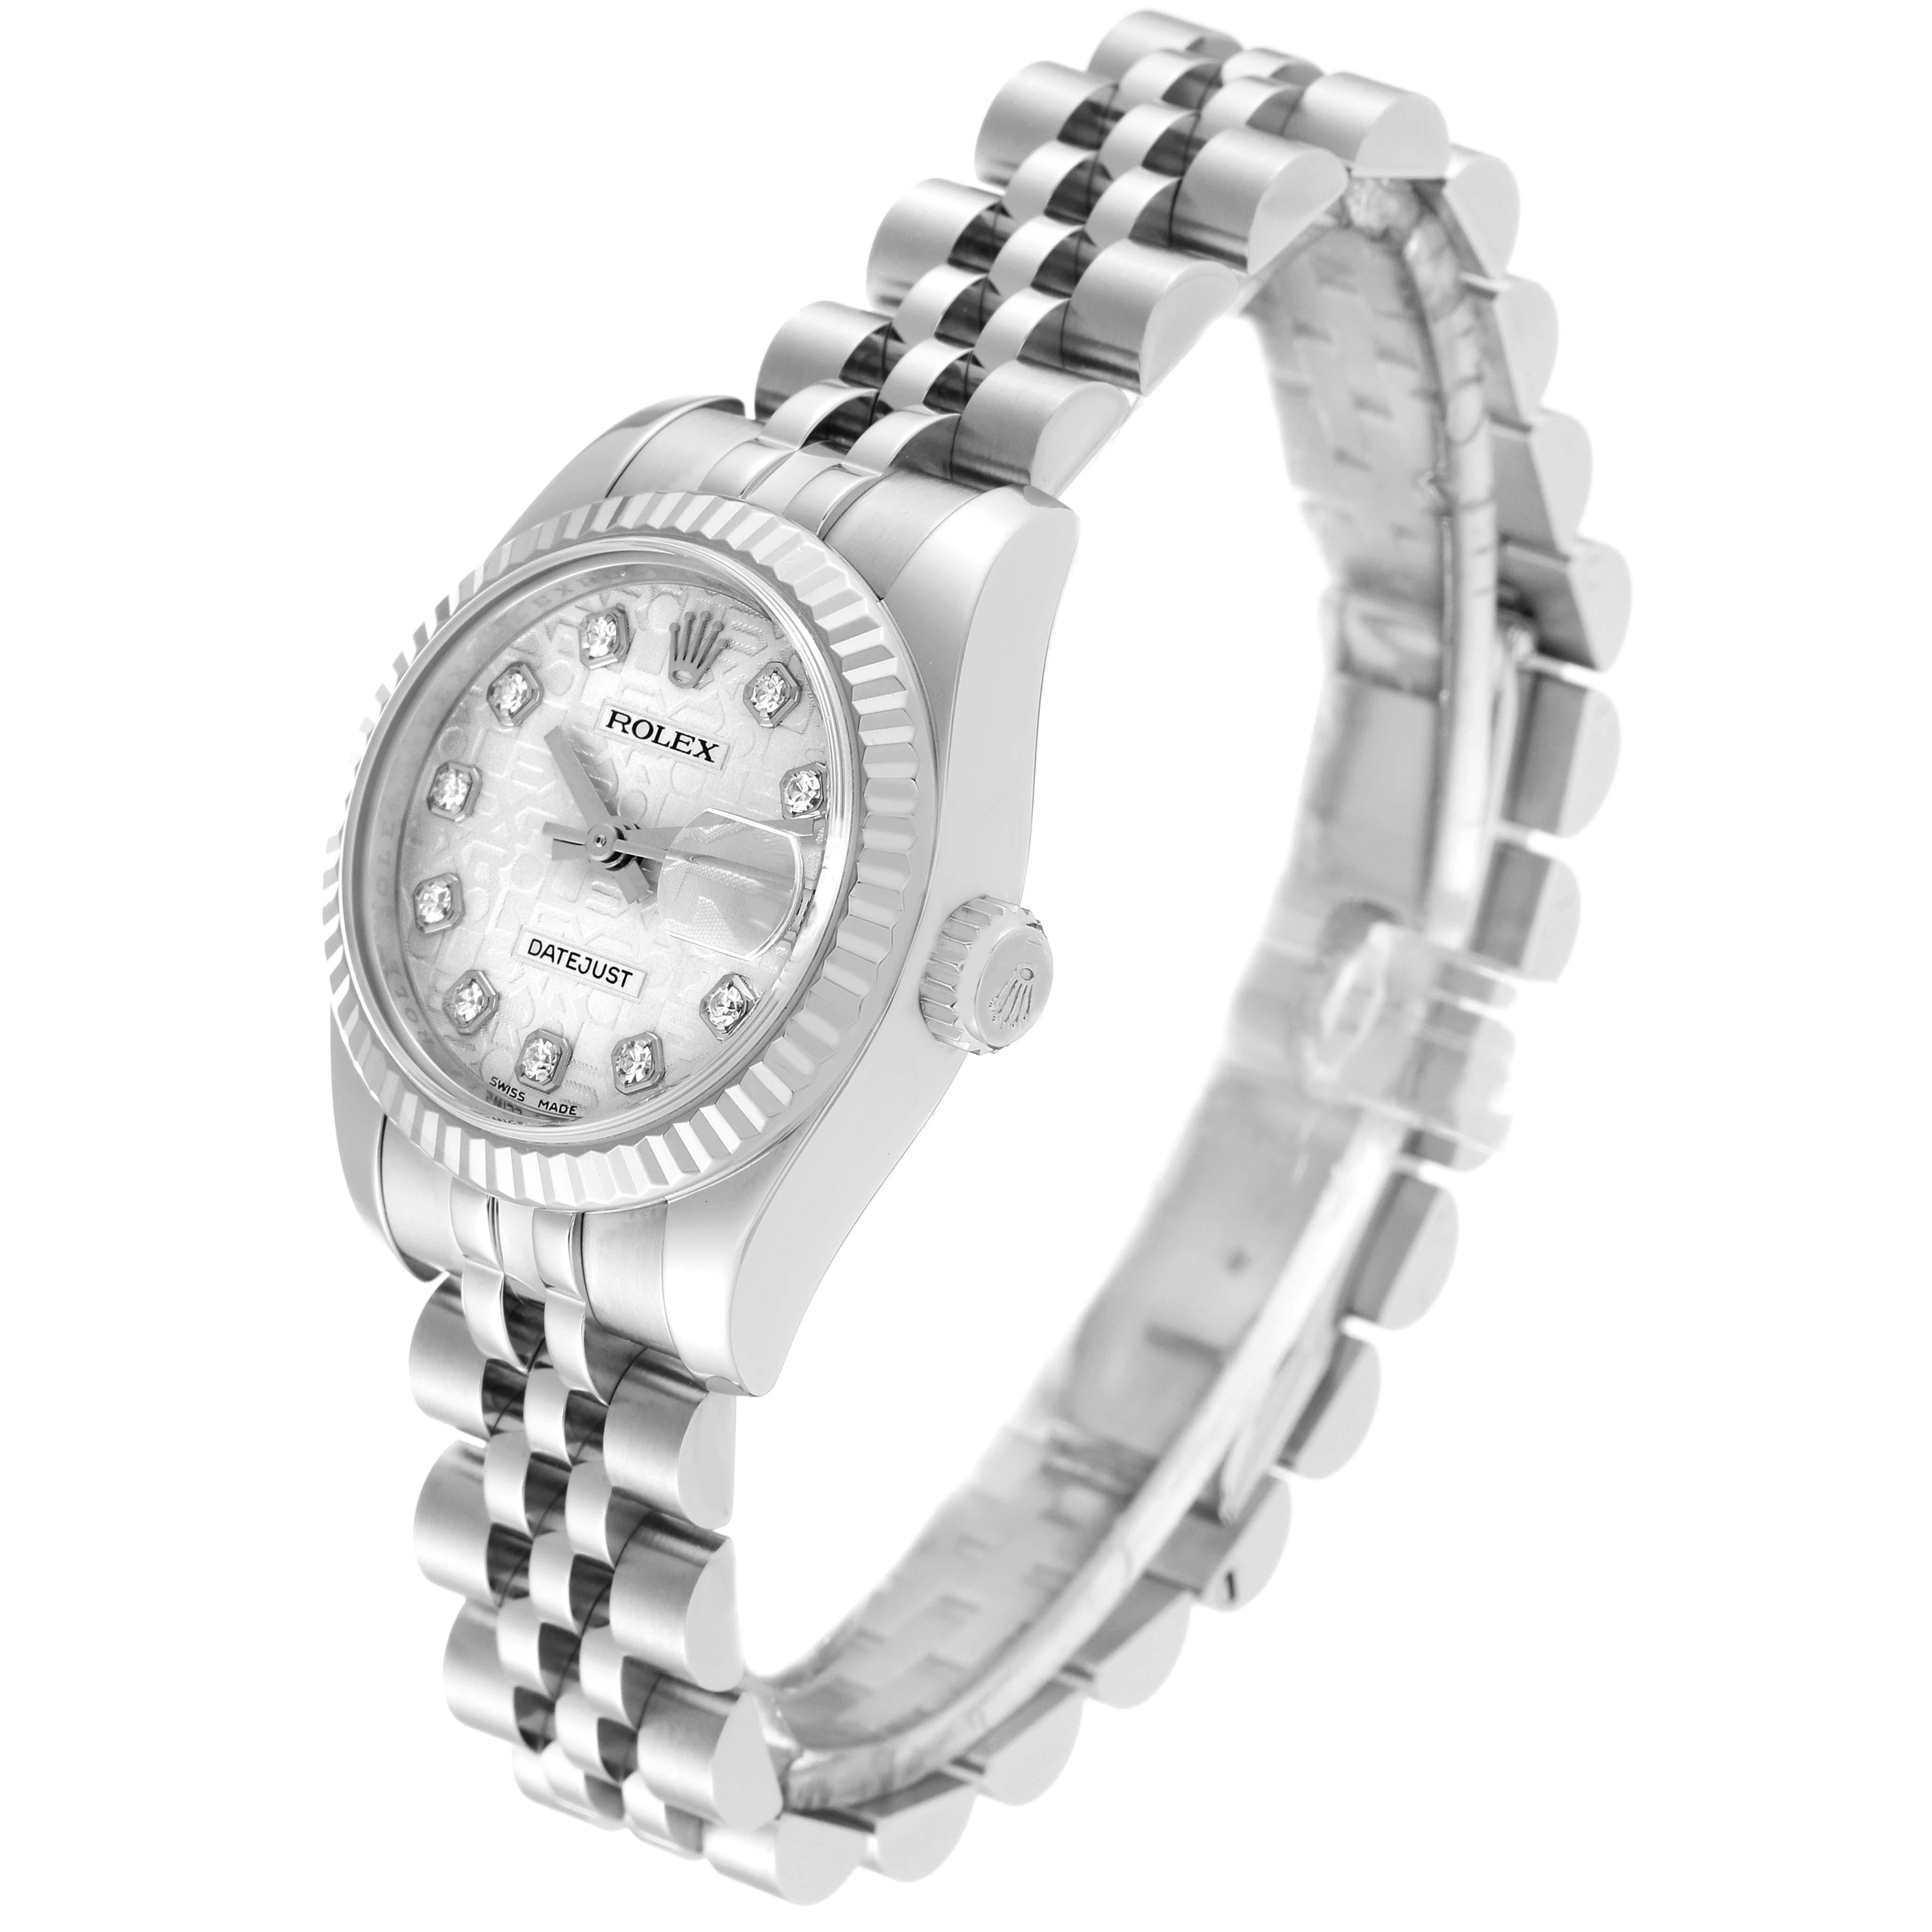 Rolex Datejust Steel White Gold Diamond Dial Ladies Watch 179174 Box Card For Sale 5